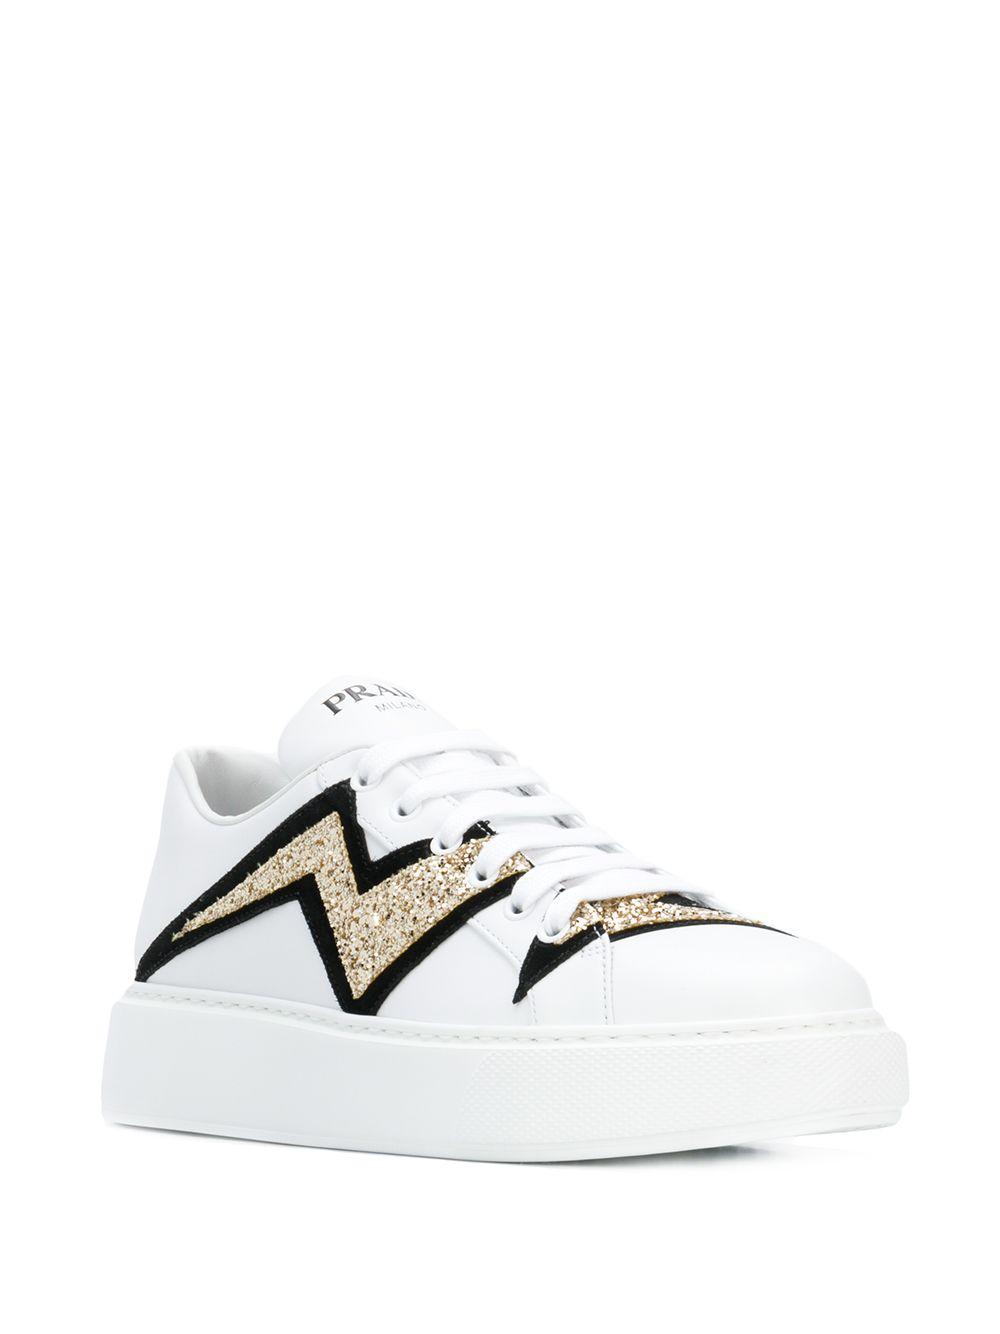 Prada Leather Lightning Bolt Low-top Sneakers in White - Lyst